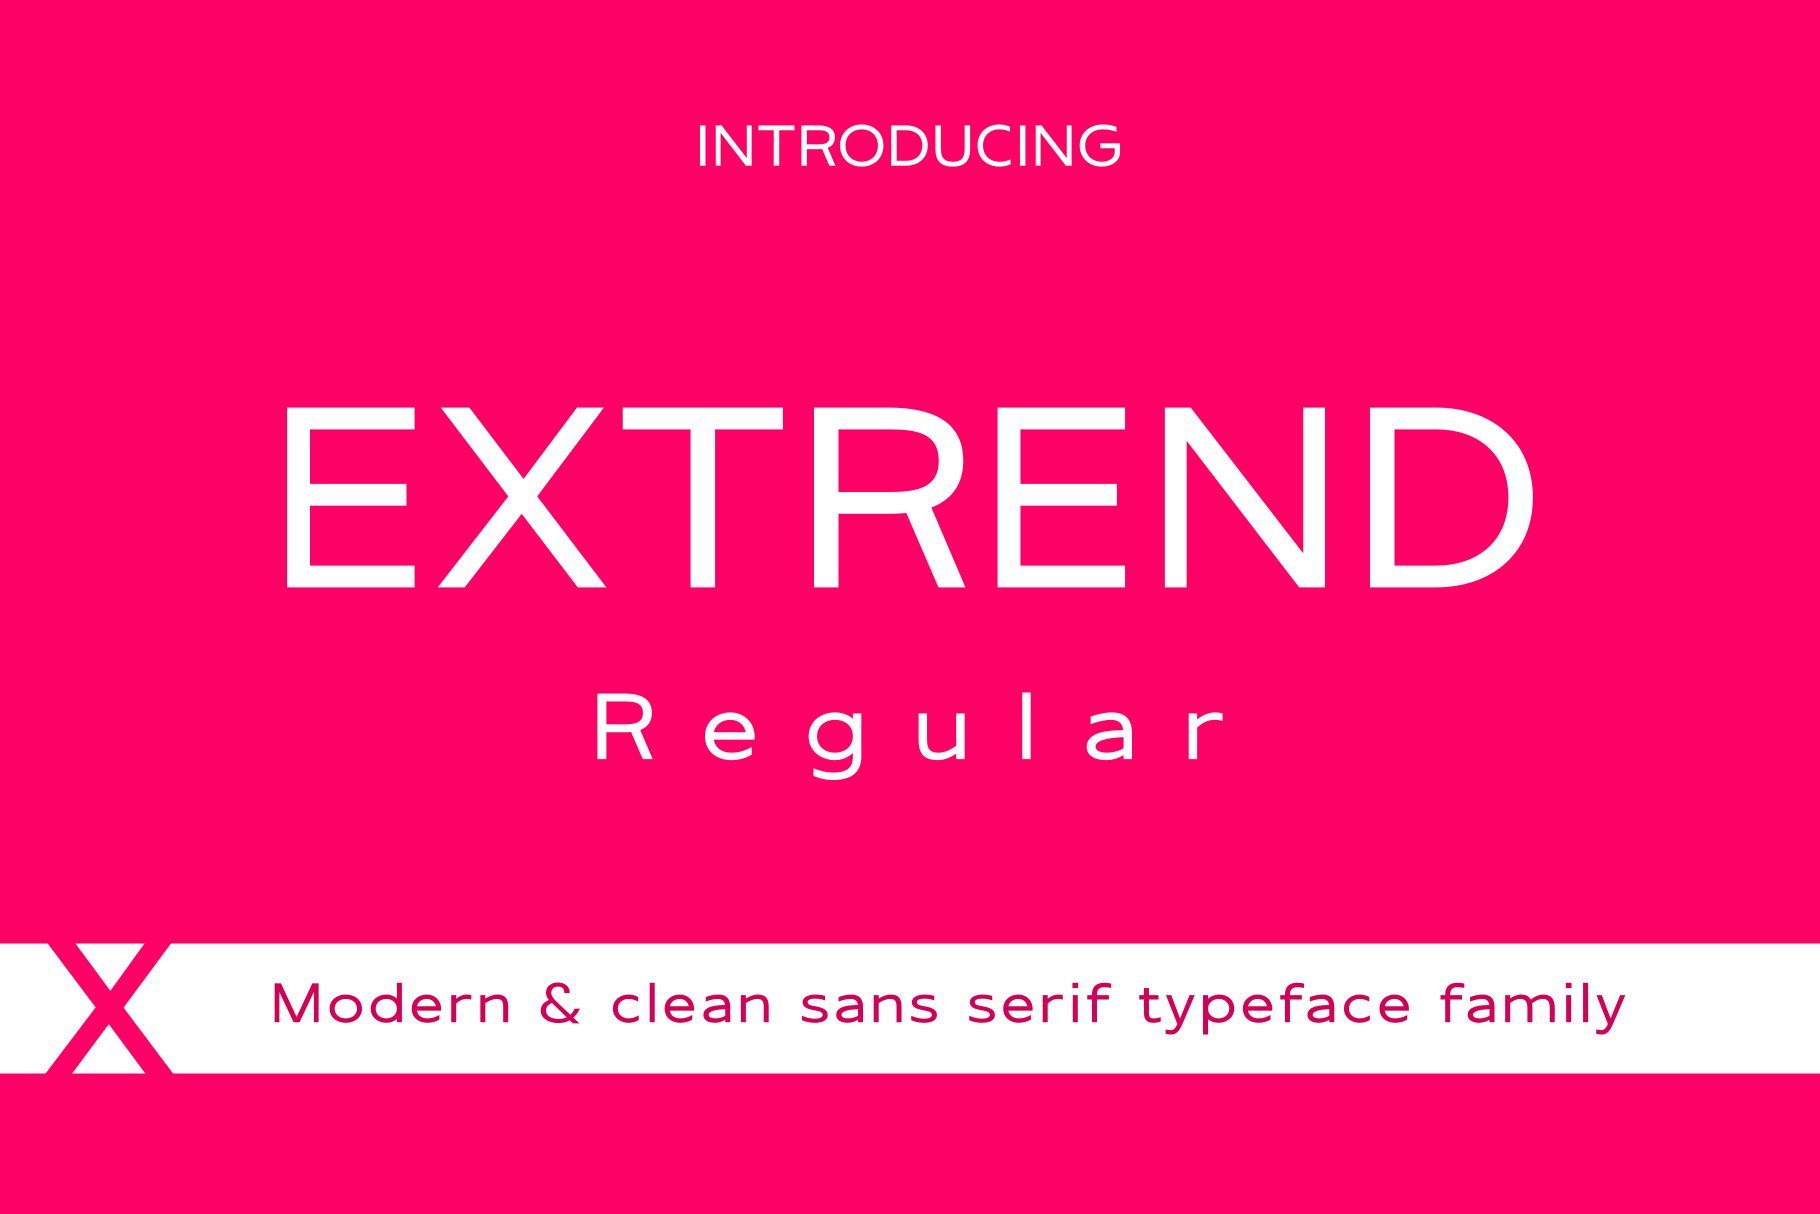 Extrend Regular - Modern Clean cover image.